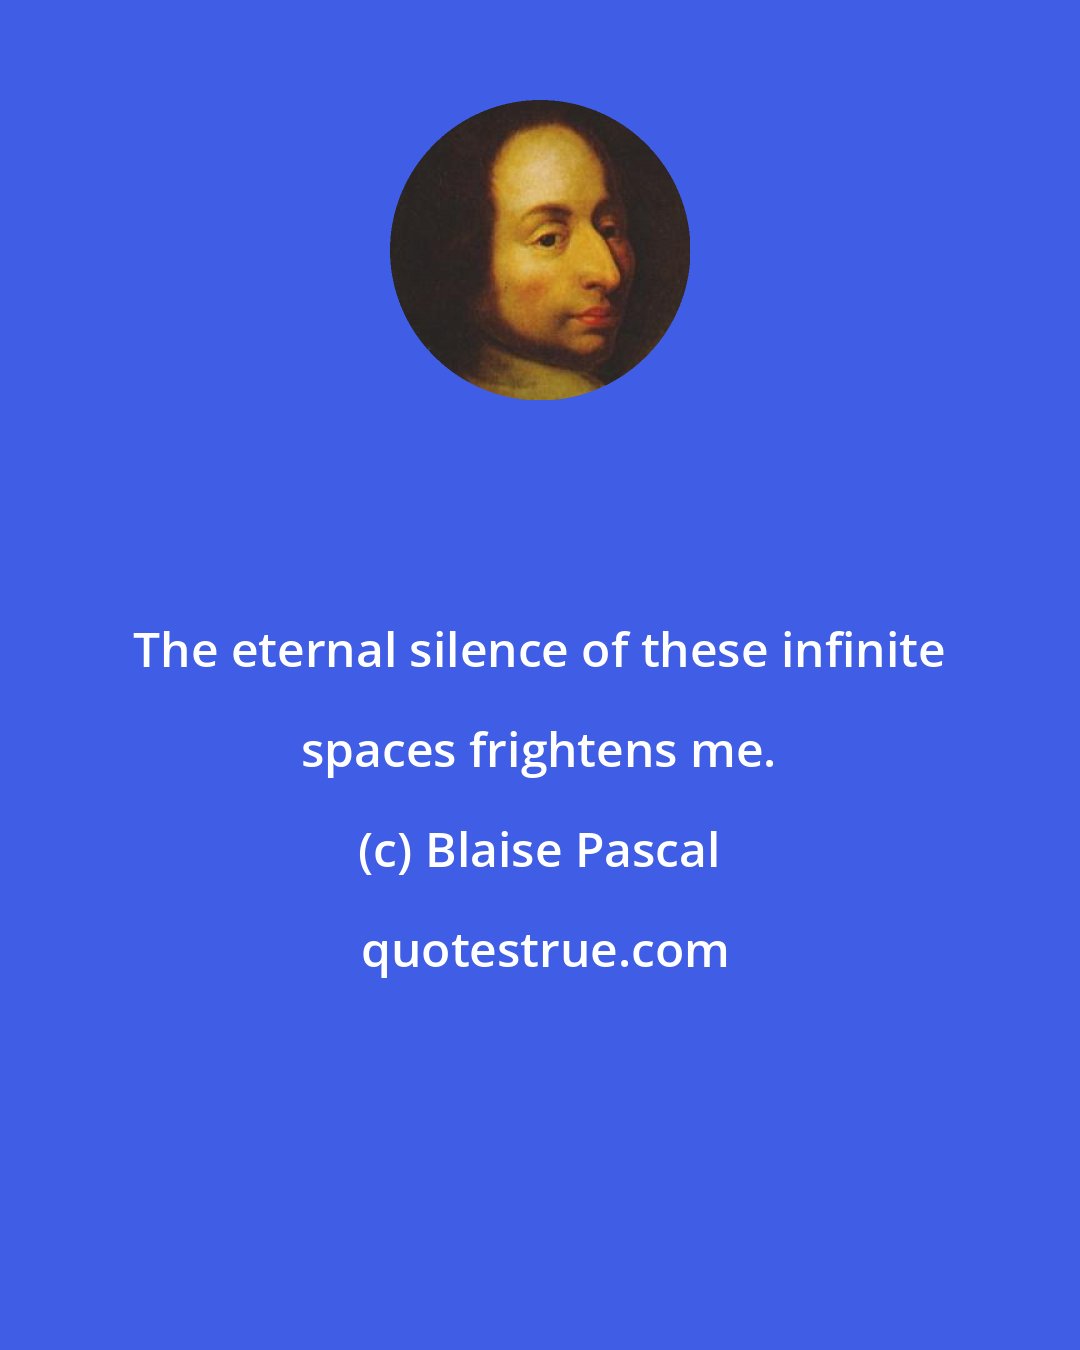 Blaise Pascal: The eternal silence of these infinite spaces frightens me.